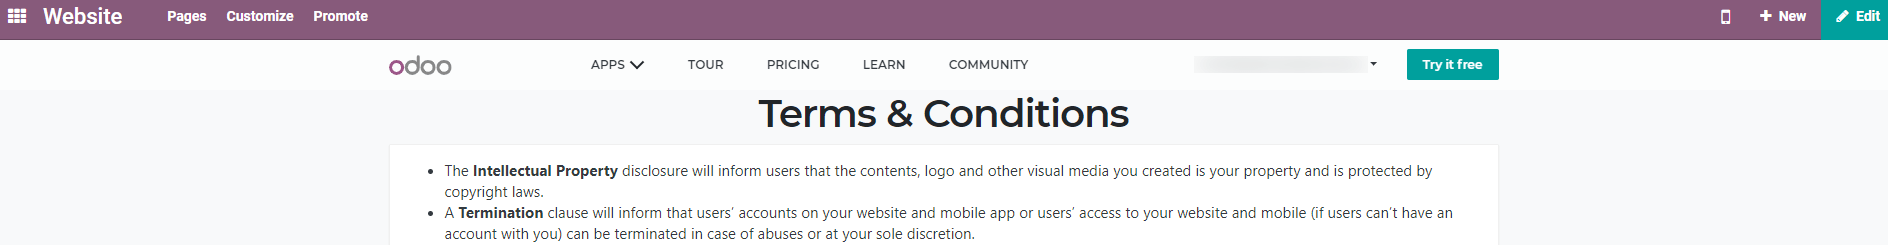 General Terms & Conditions on your website